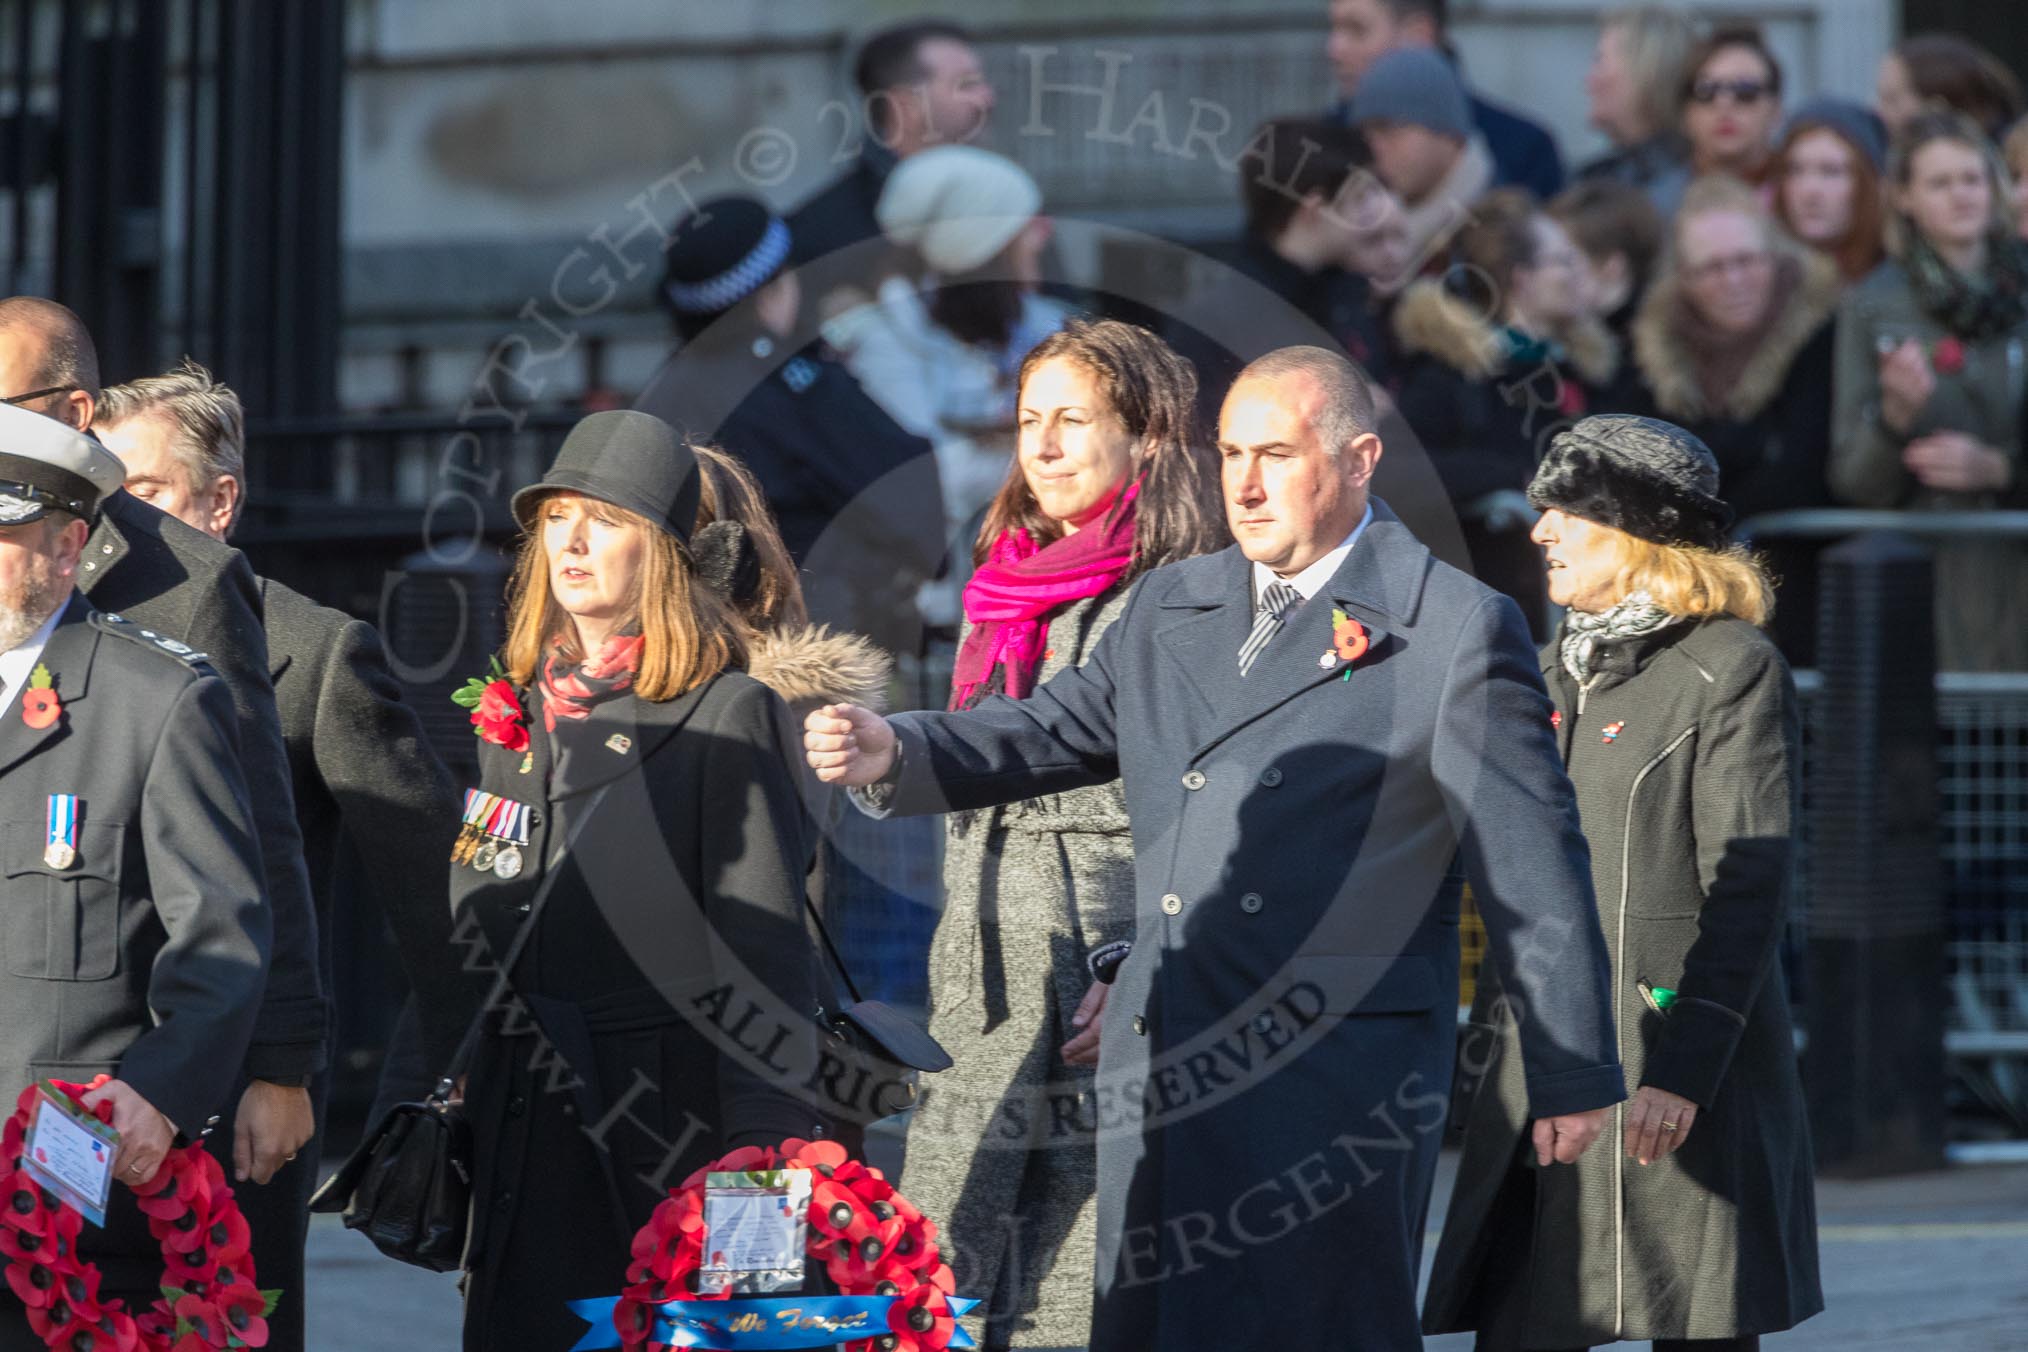 March Past, Remembrance Sunday at the Cenotaph 2016: M52 Munitions Workers Association.
Cenotaph, Whitehall, London SW1,
London,
Greater London,
United Kingdom,
on 13 November 2016 at 13:20, image #3067